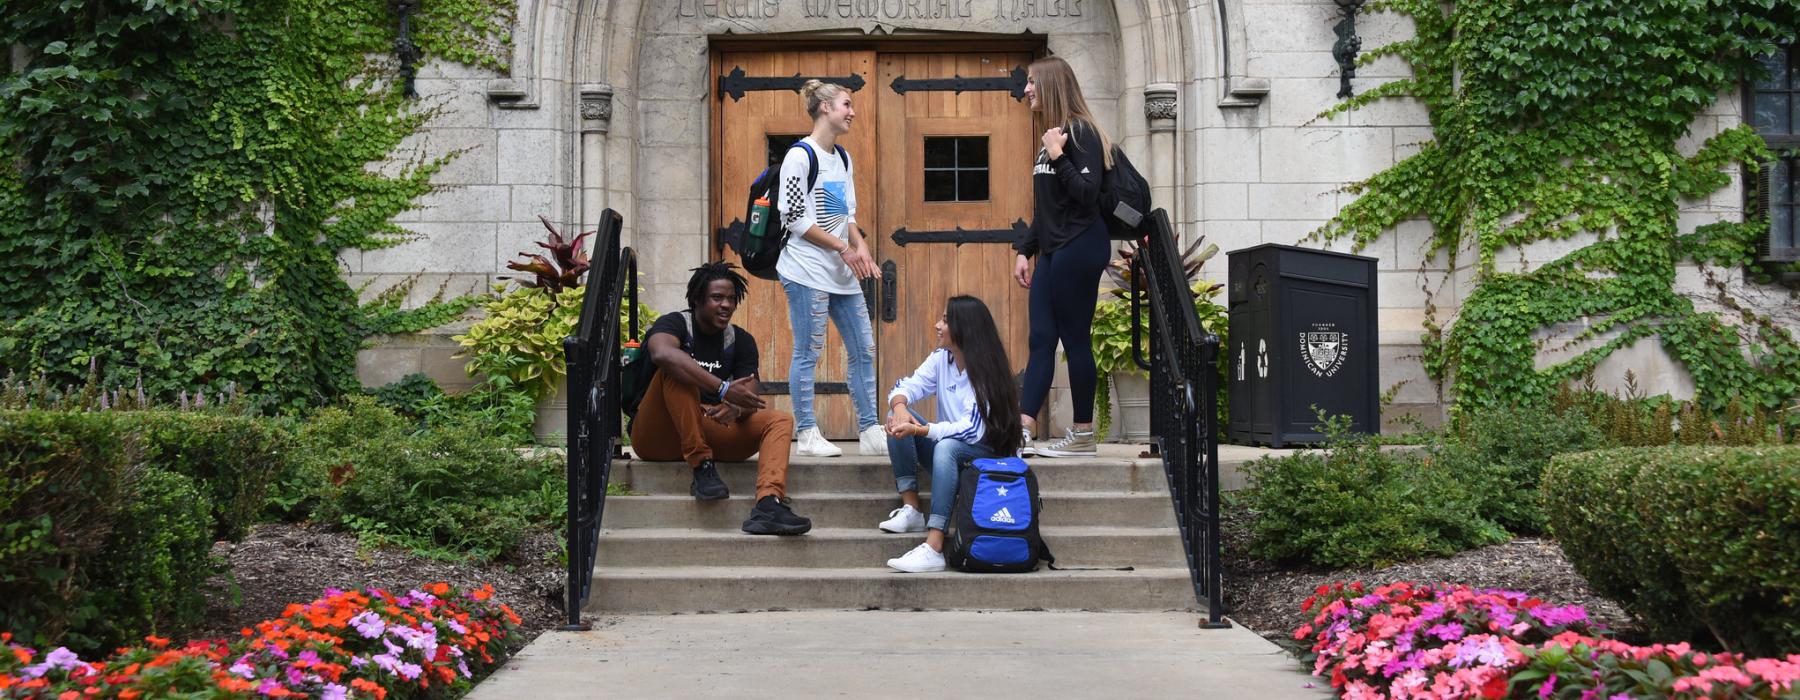 A group of four students talking in front of the Lewis Hall exterior door. Two students stand in front of the door. Two students are seated on the steps leading up to the door.